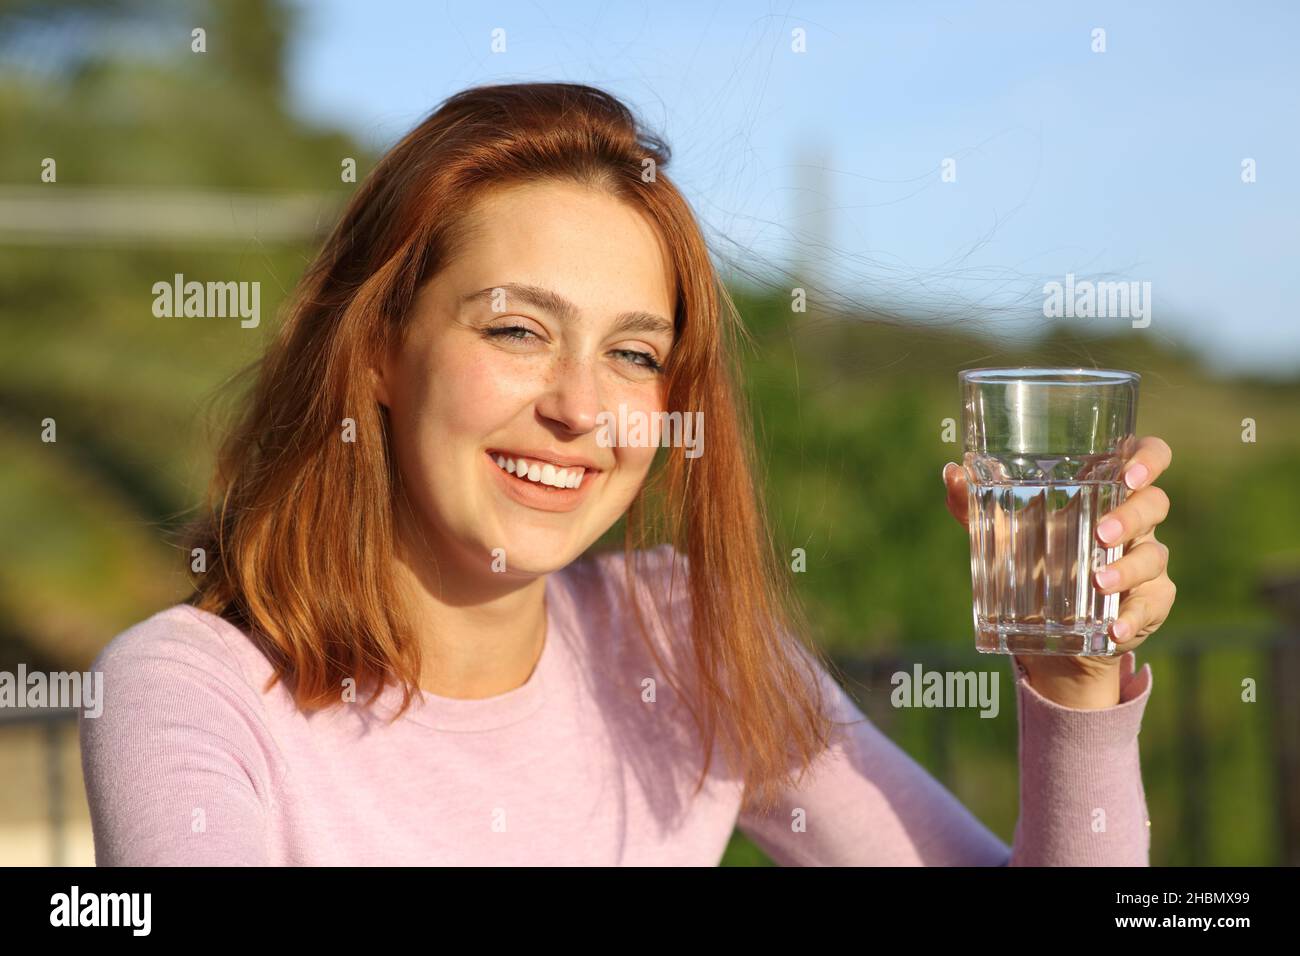 Happy woman holding glass of water smiling at camera in a balcony Stock Photo